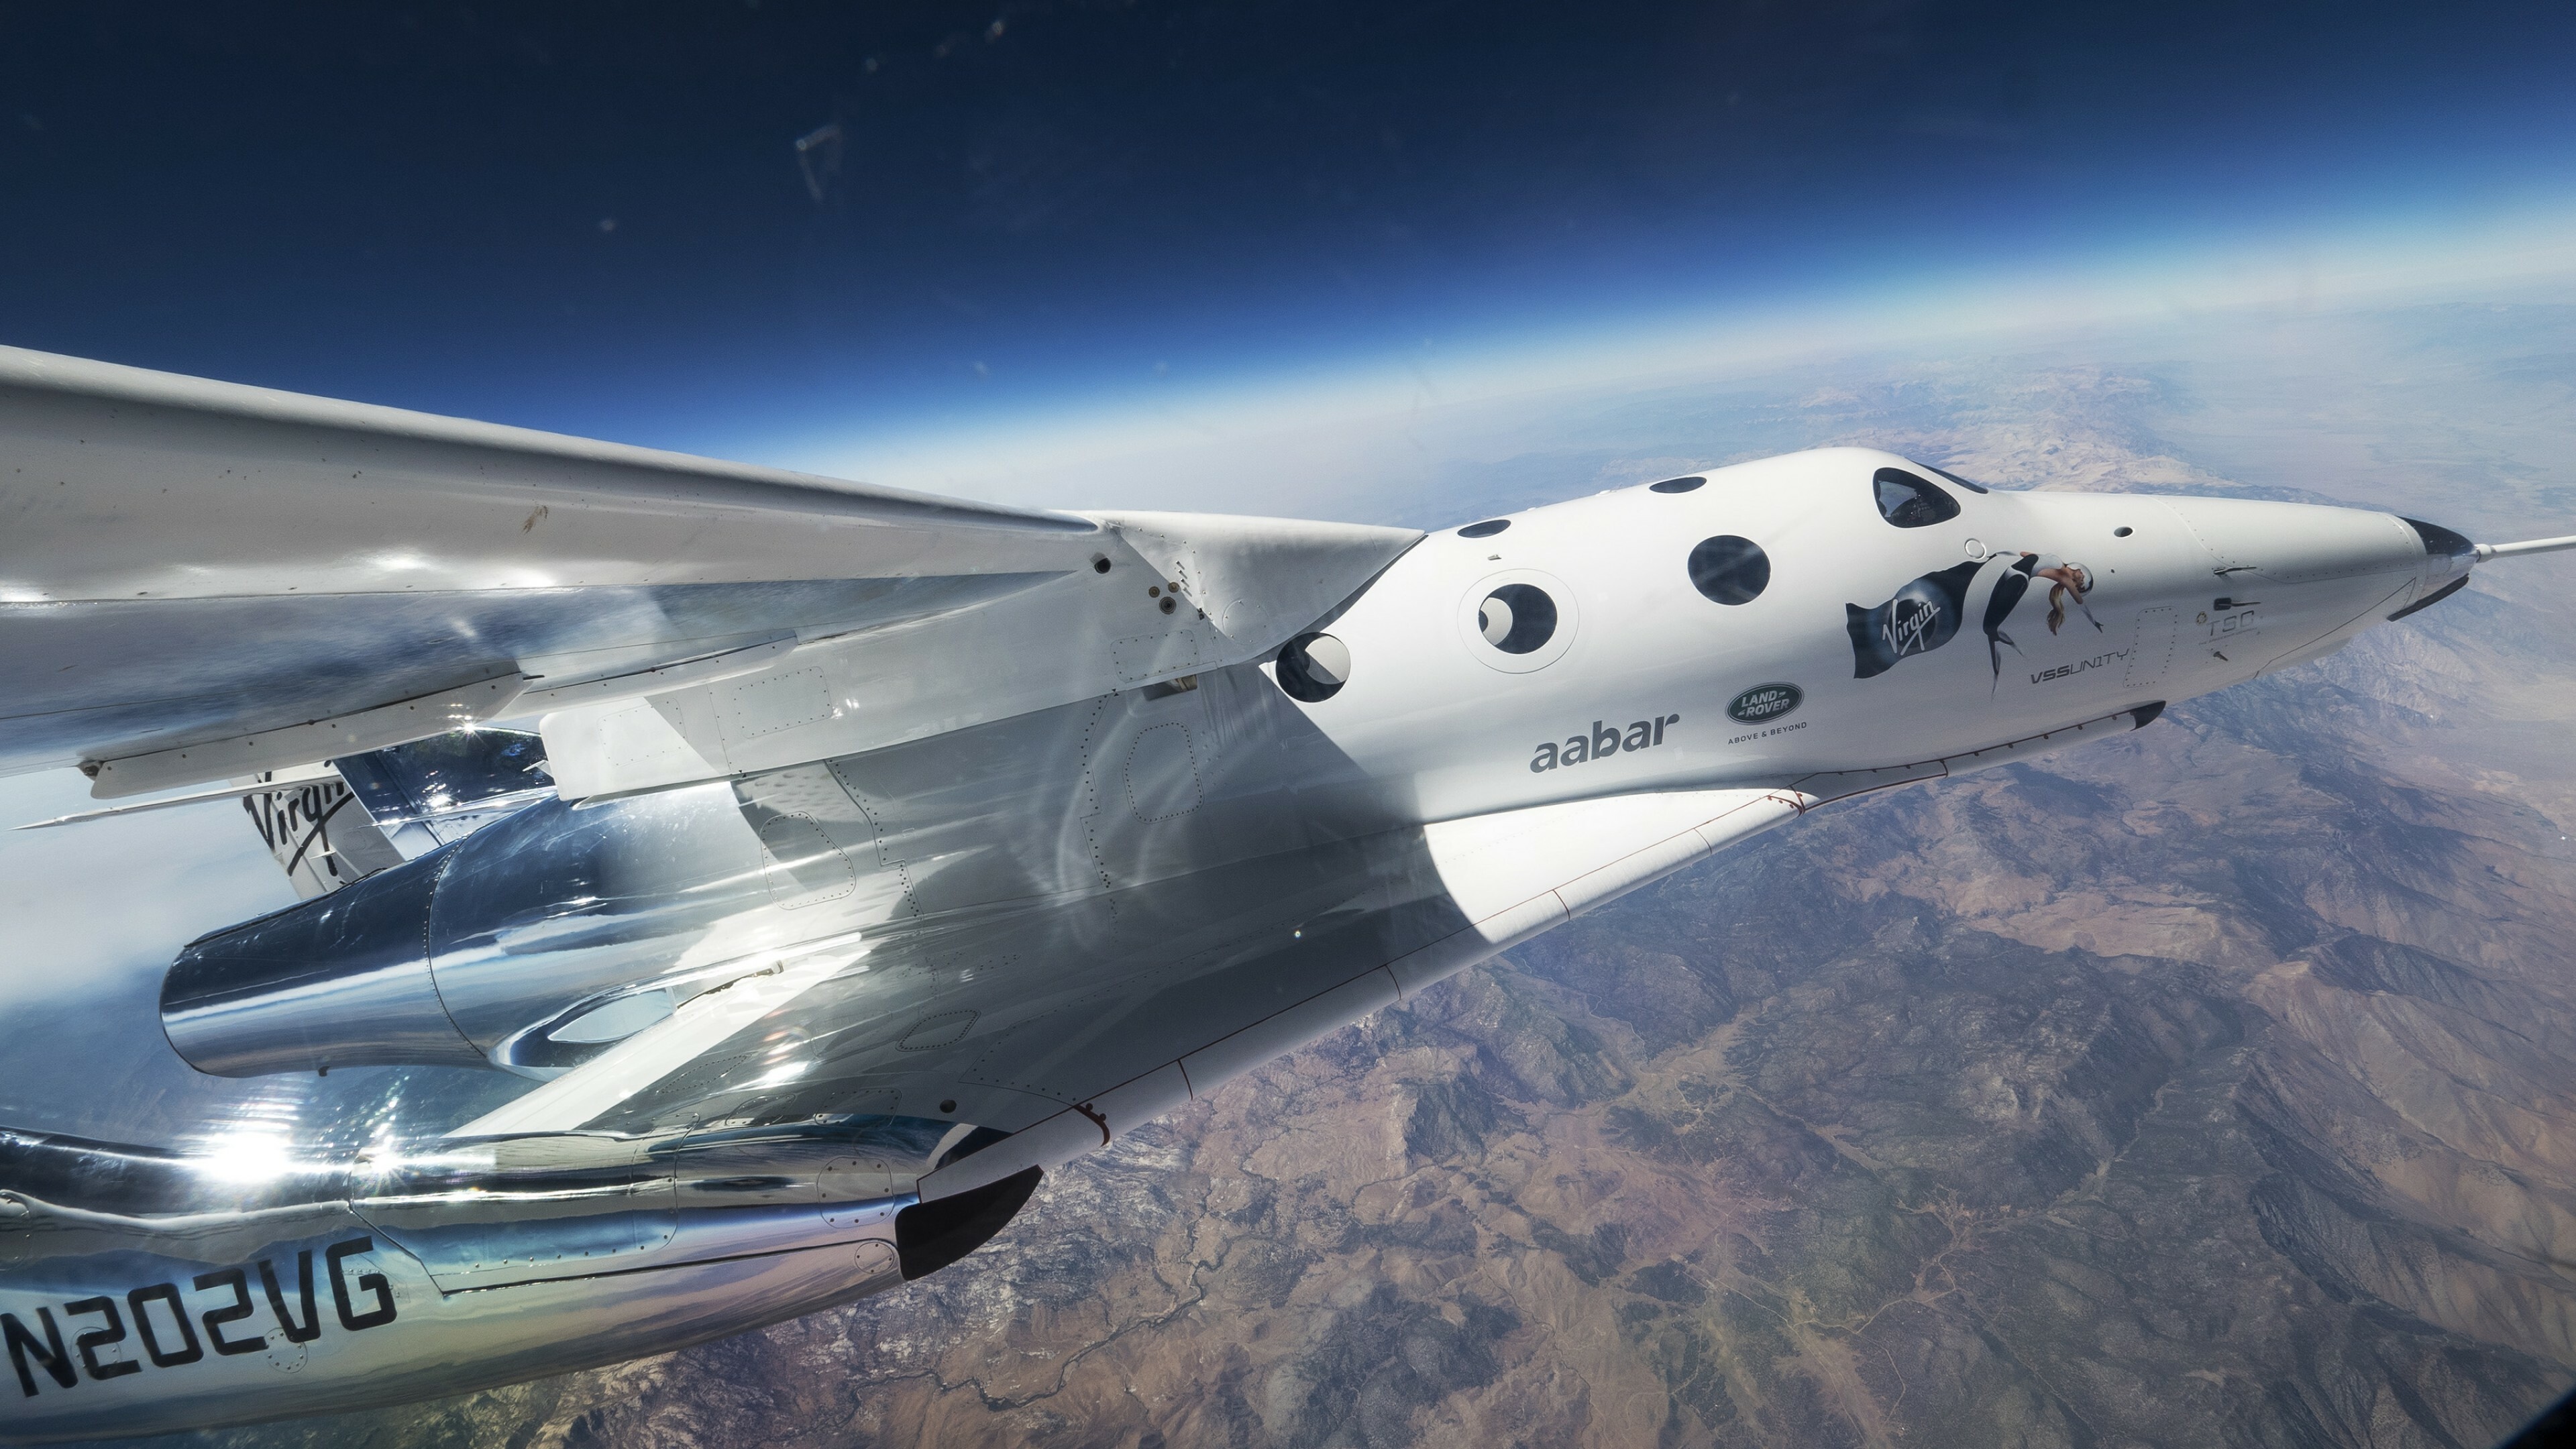 Space Tourism: Virgin Galactic, VSS Unity, Human cosmos travel for recreational purposes. 3840x2160 4K Wallpaper.